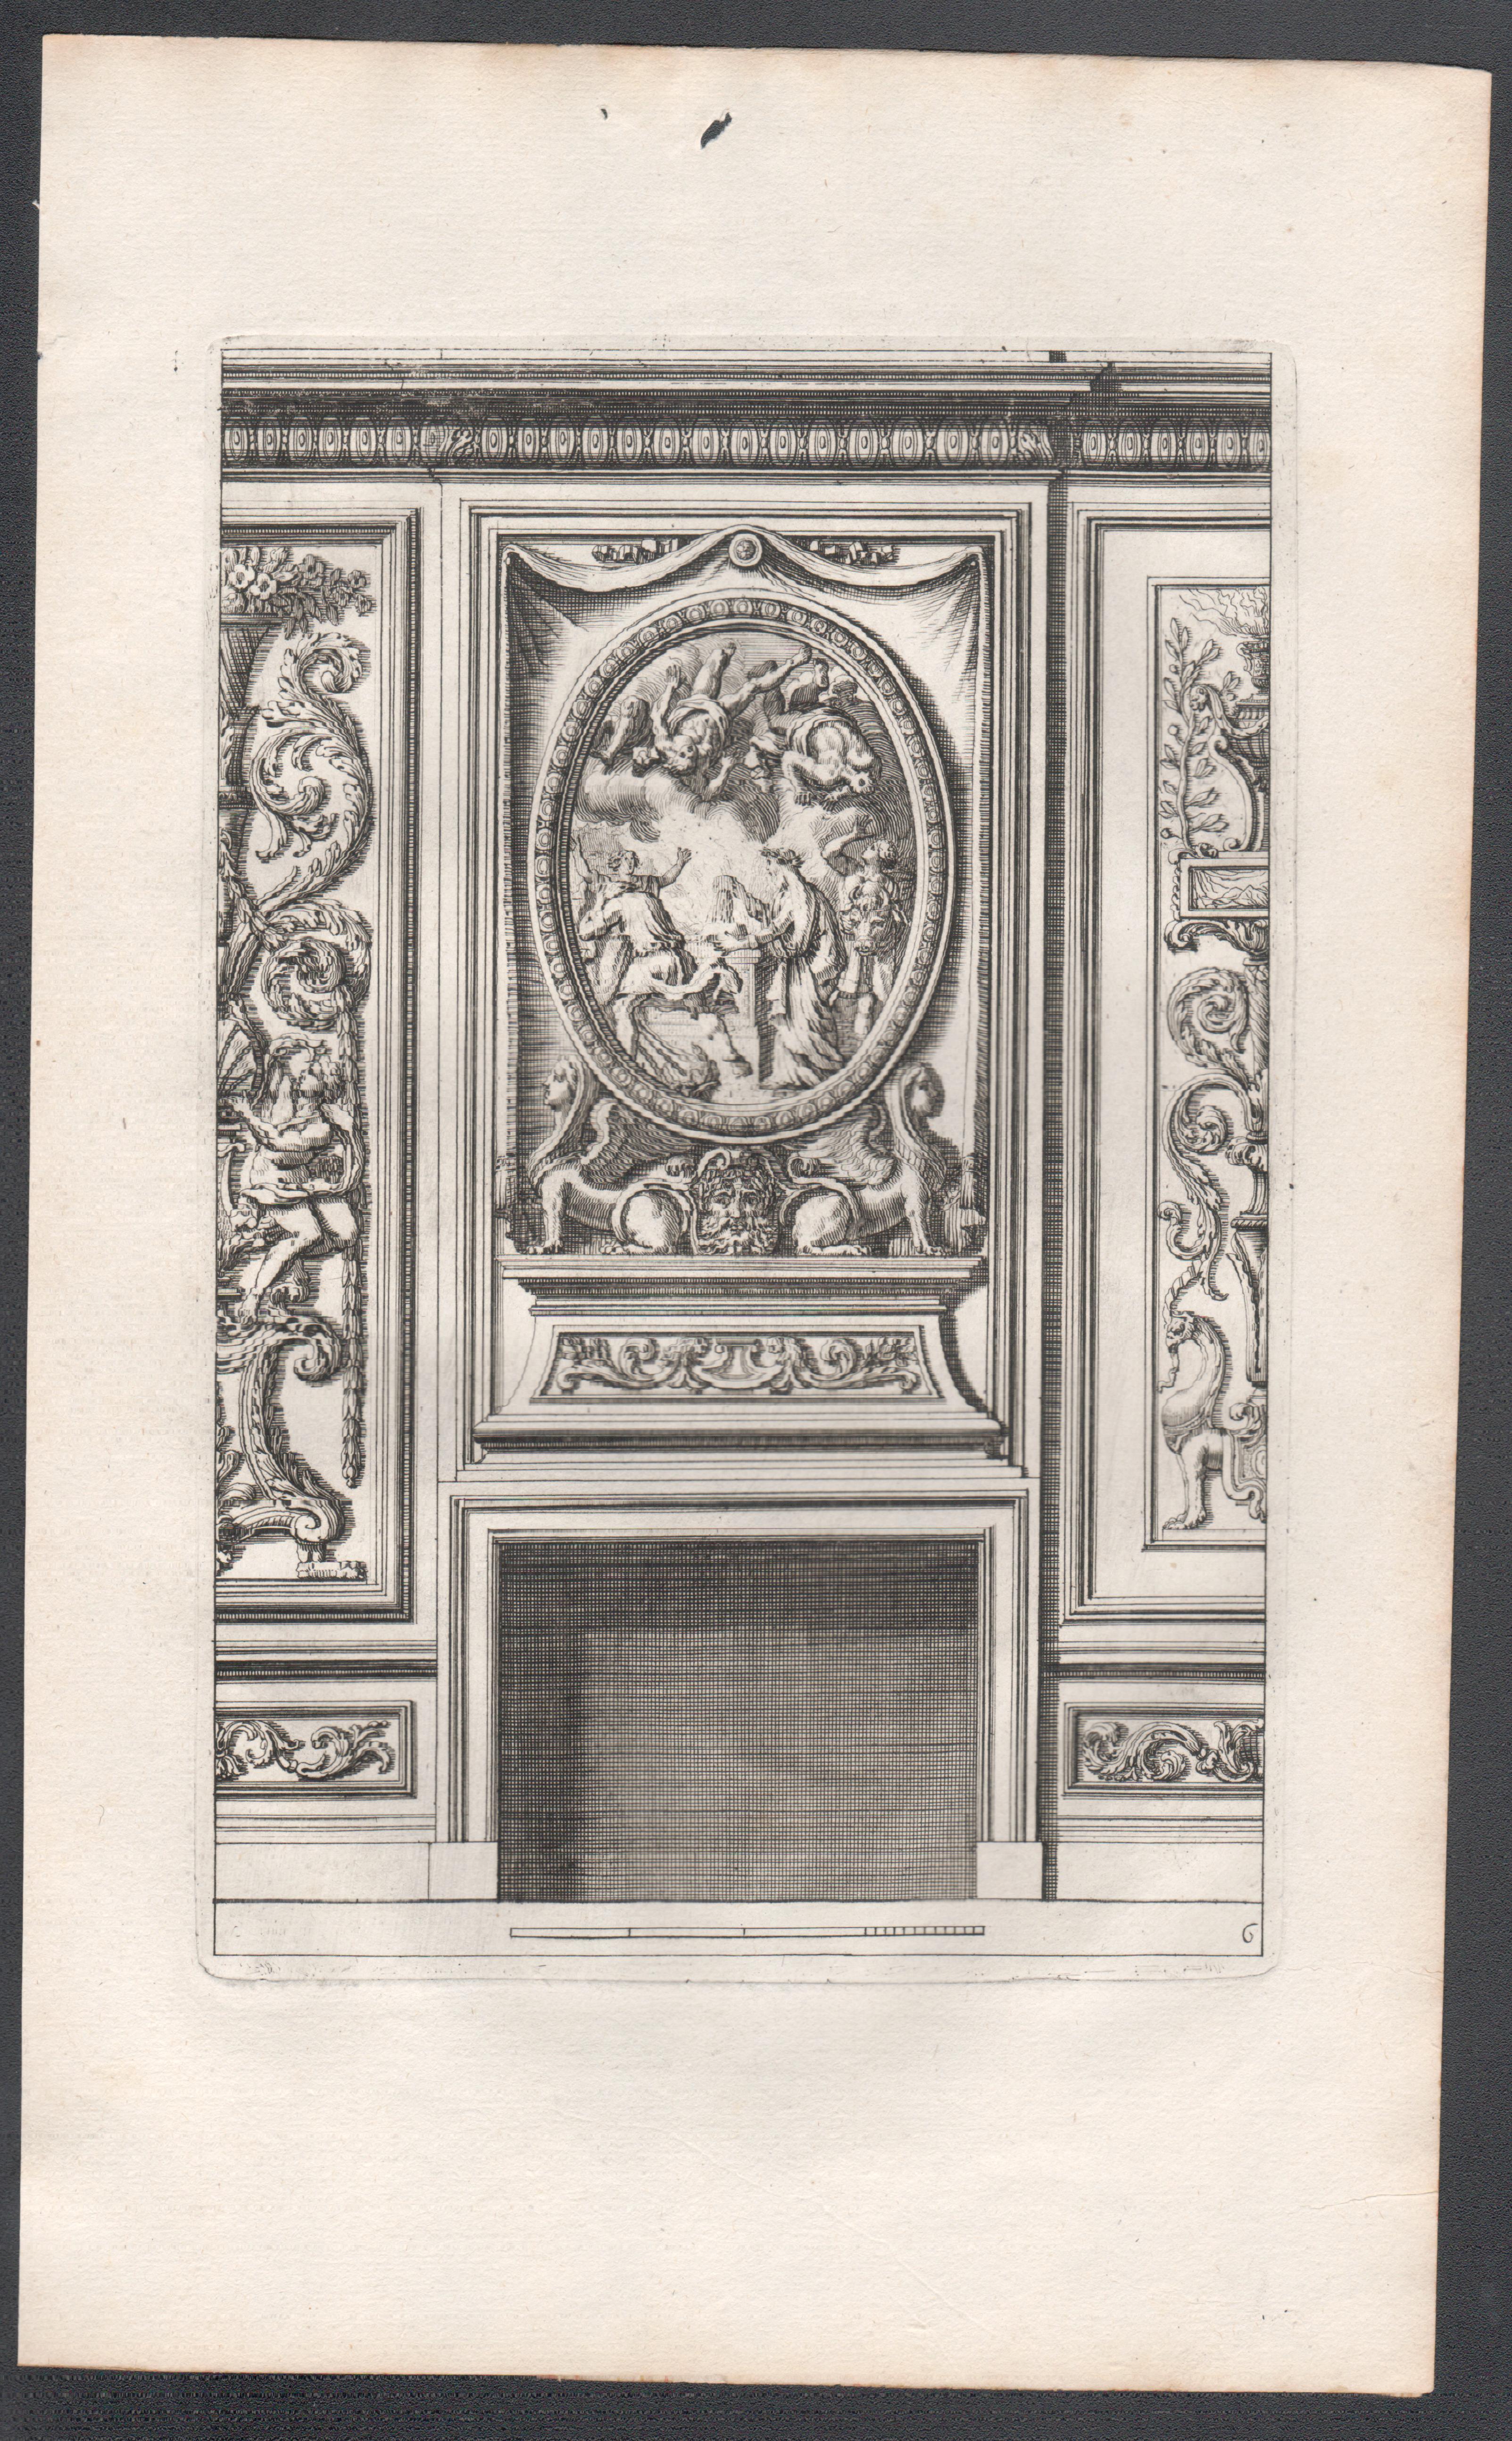 Set of 6 French Louis XIV period chimney-piece design engravings by Jean Dolivar For Sale 8